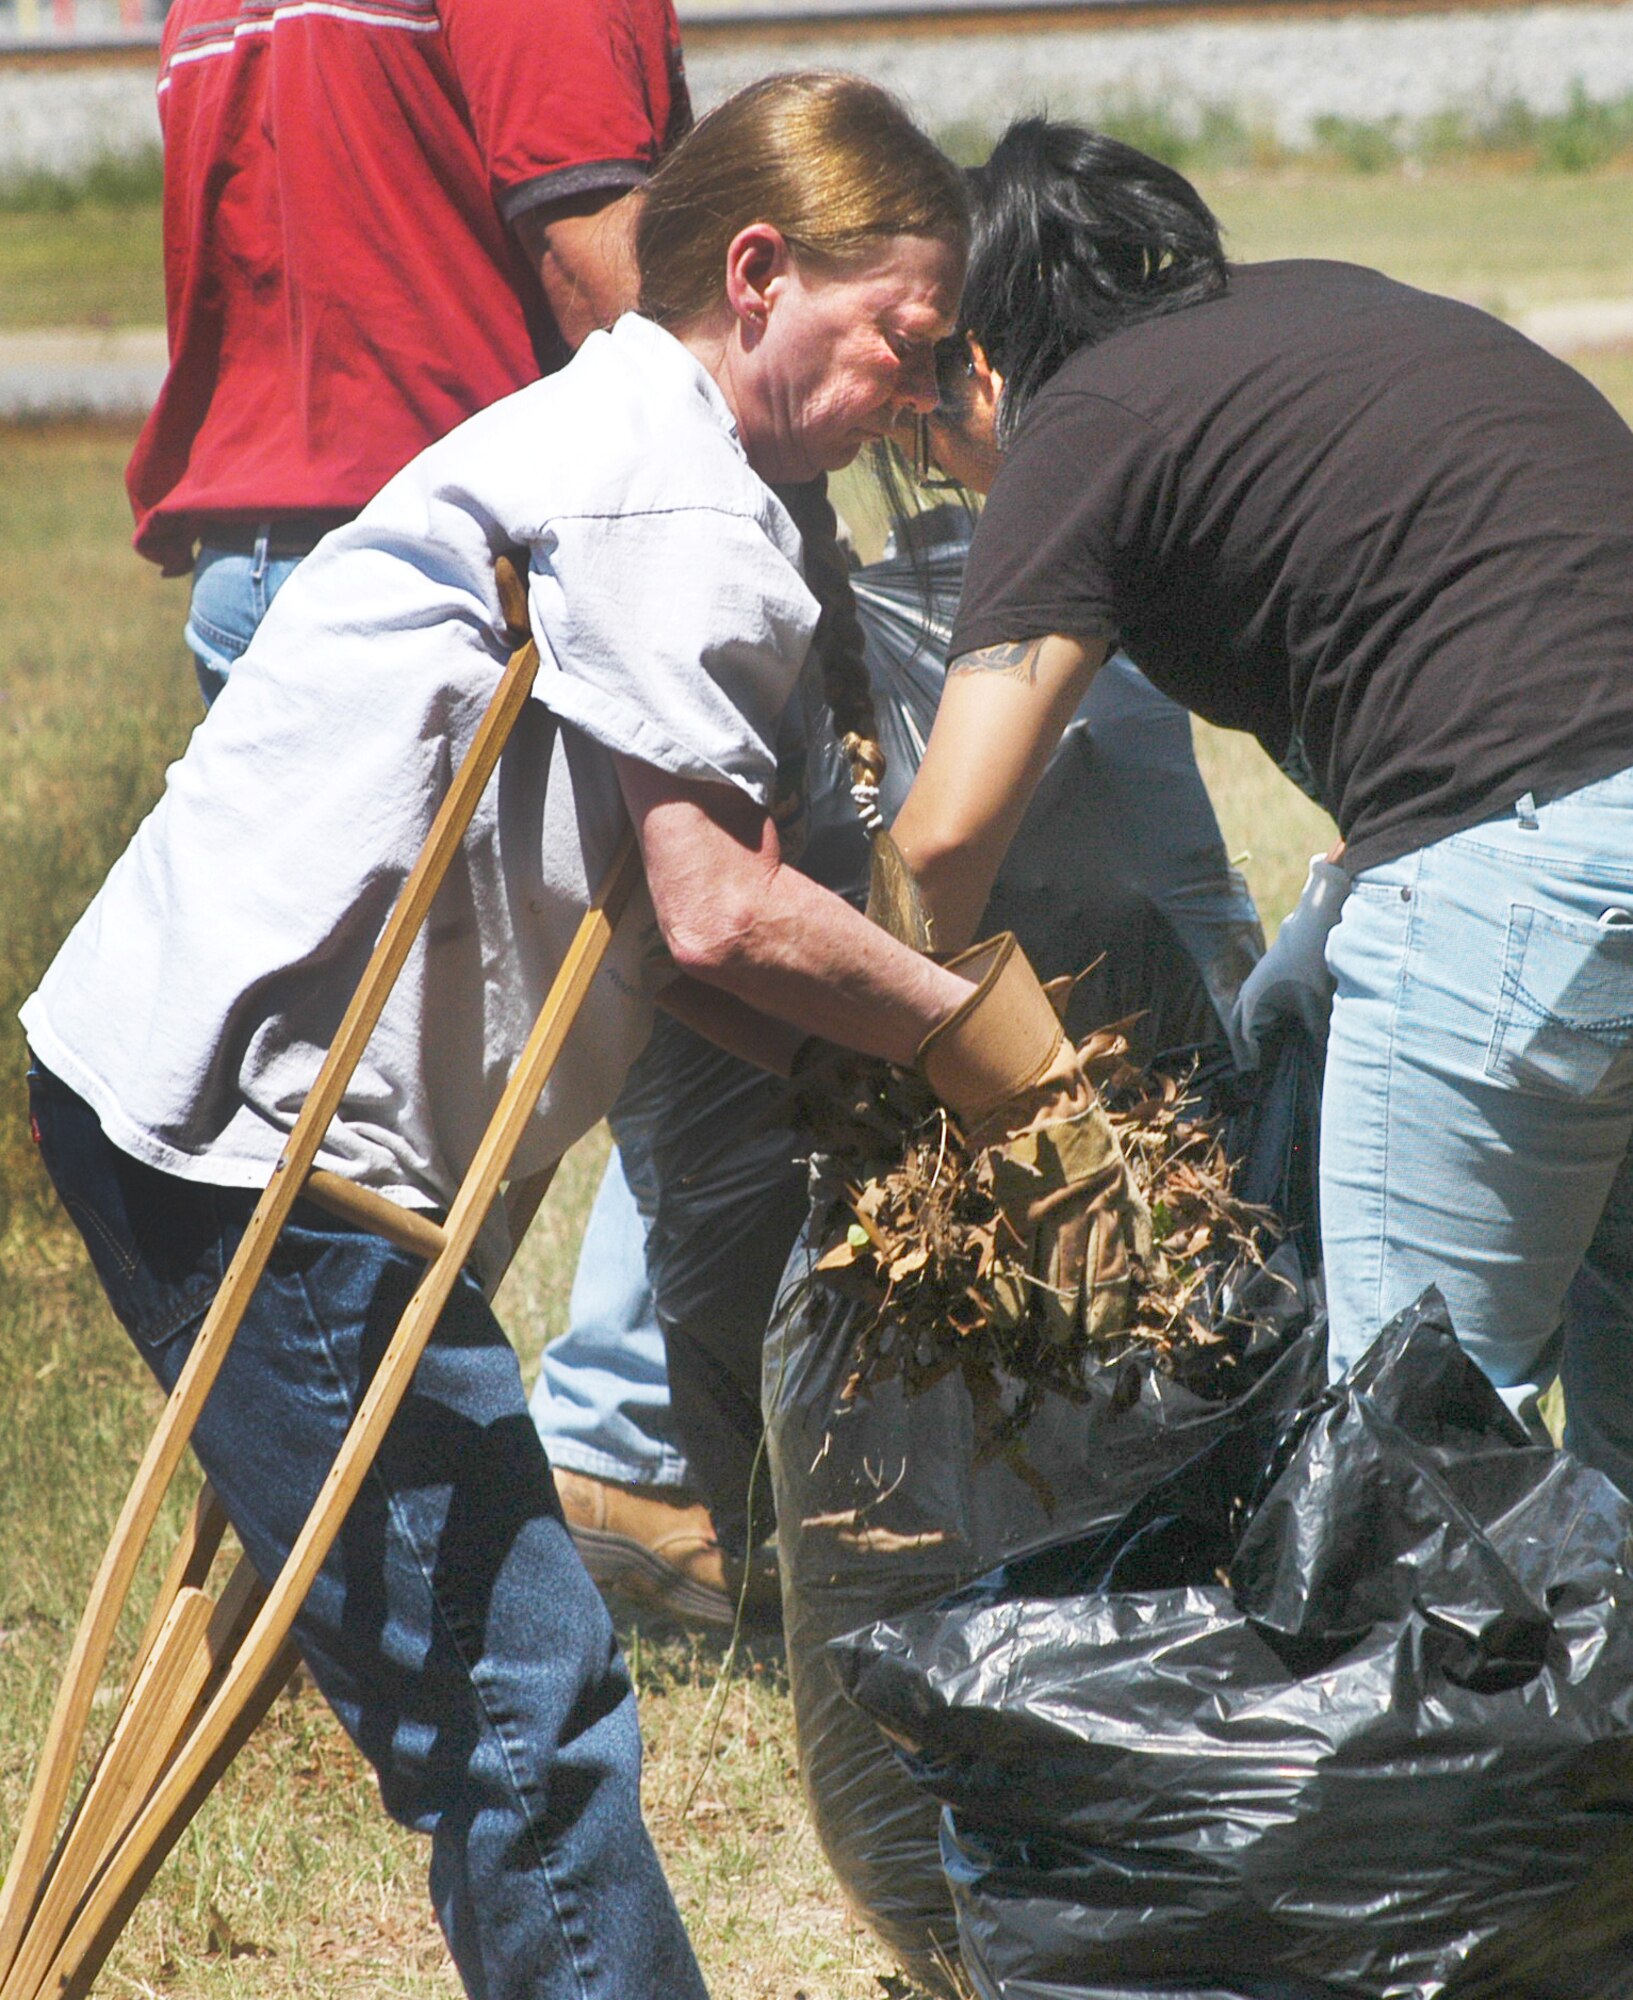 Christl Kohls, Air Force Reserve Command, fills a bag with leaves and debris during clean-up at Bryant Cemetery in Warner Robins. The clean-up is part of observance activities for Robins Earth Day. (U. S. Air Force photo by Sue Sapp)